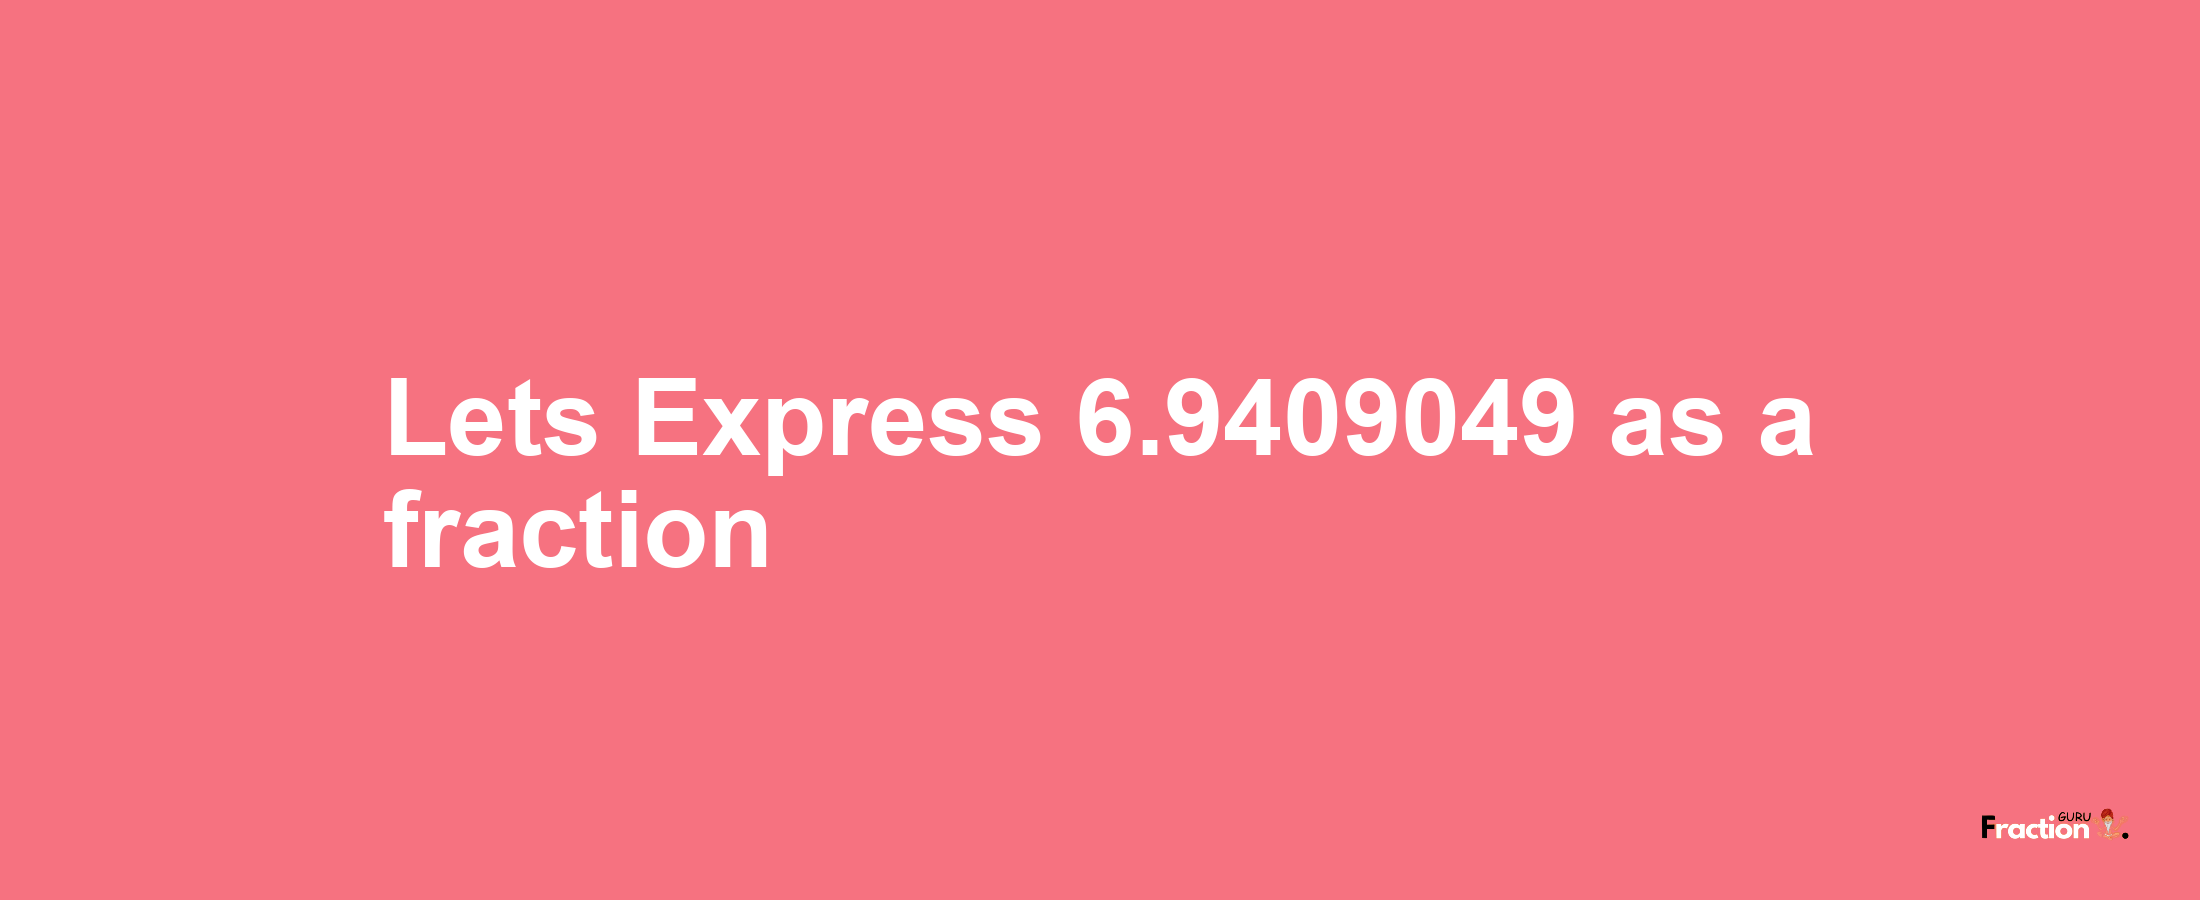 Lets Express 6.9409049 as afraction